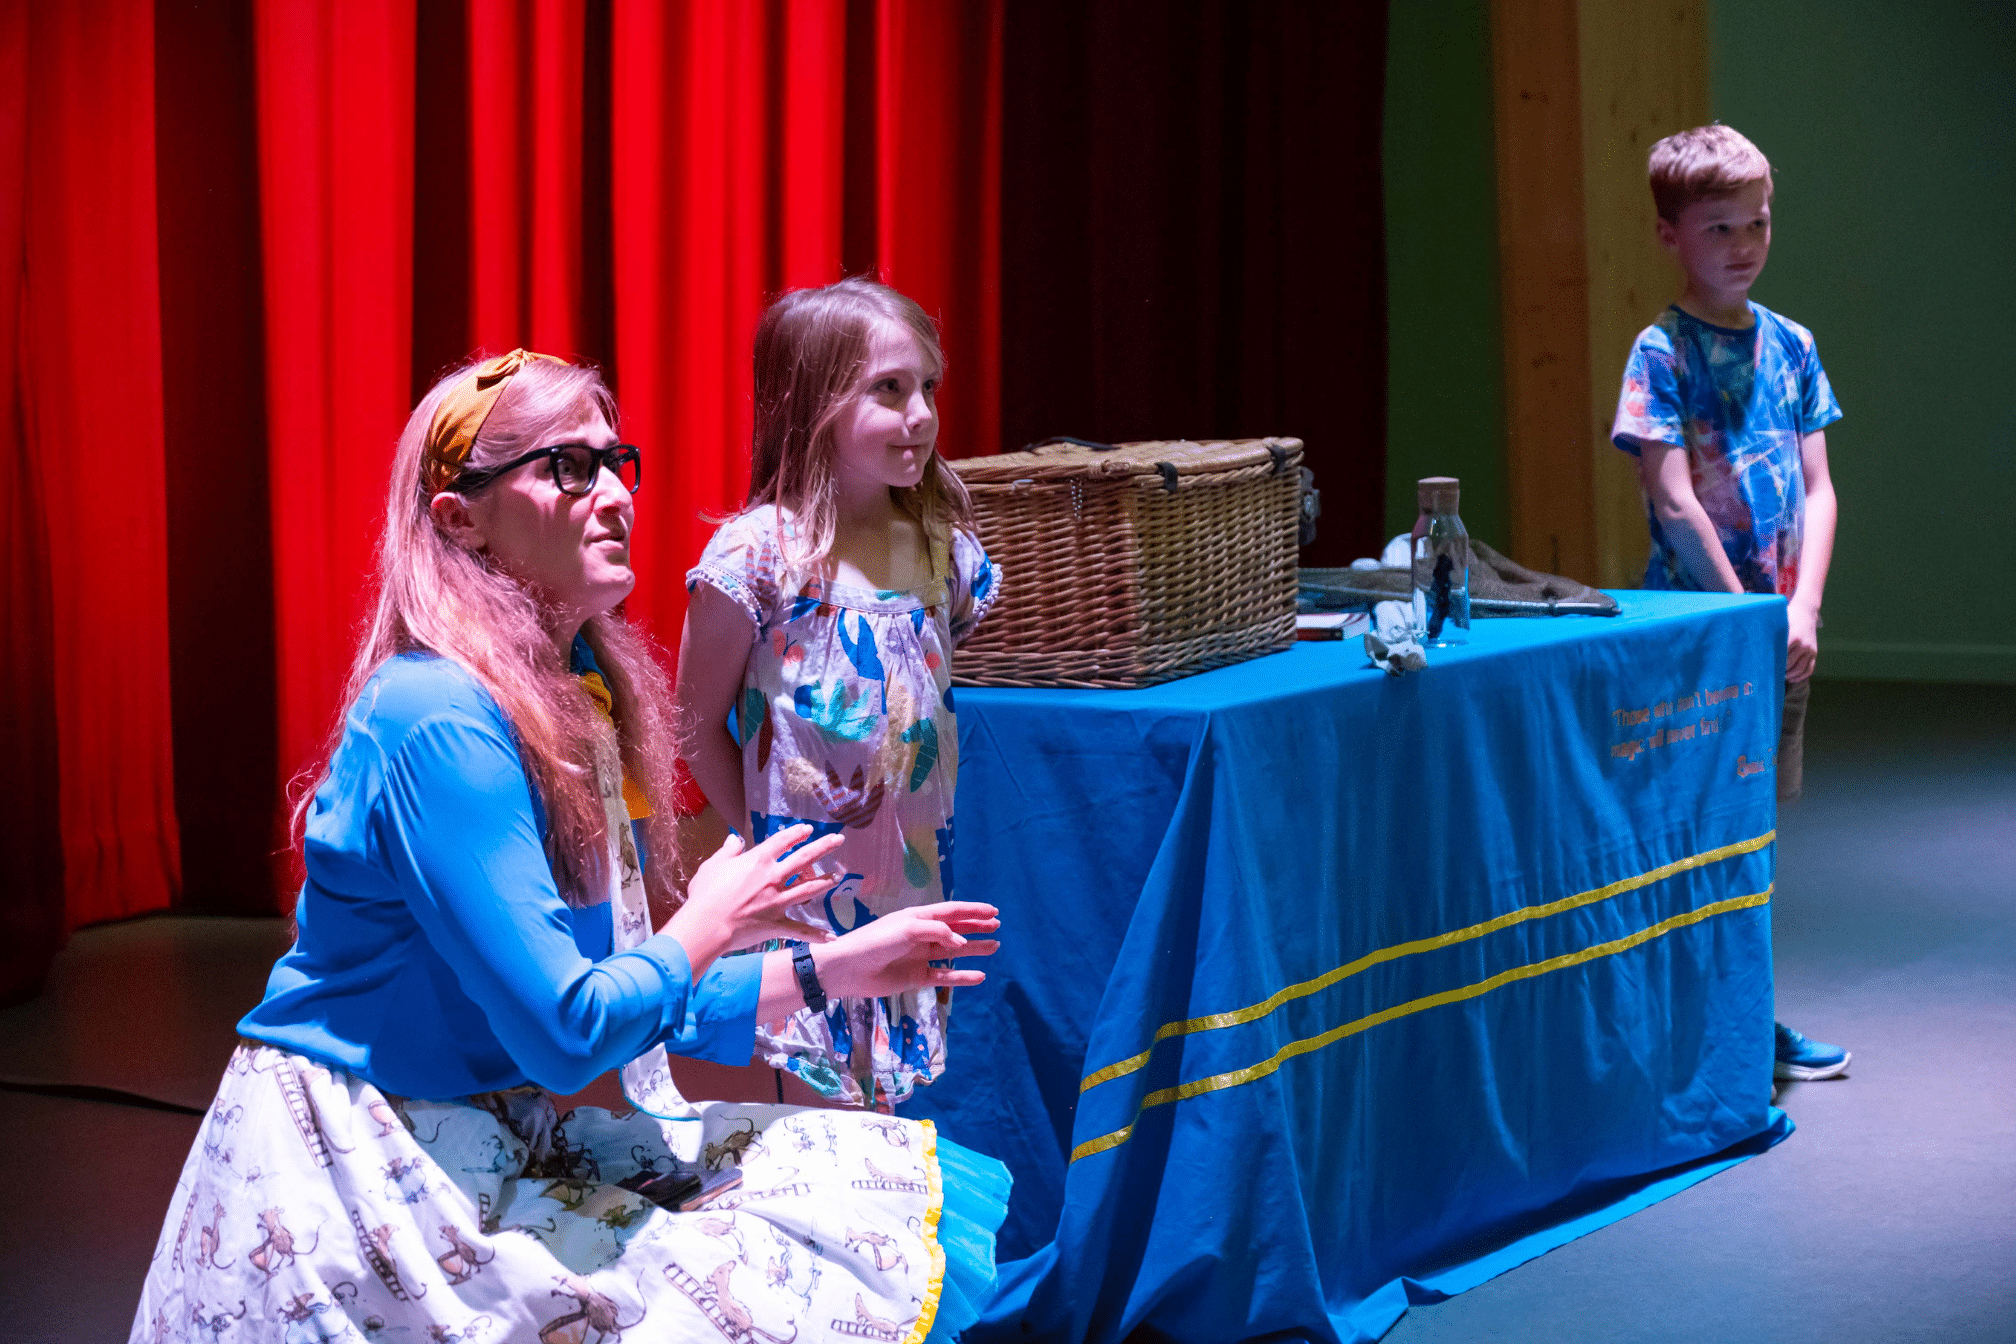 Two children are on stage with a blue table between them. They are with the female actress.